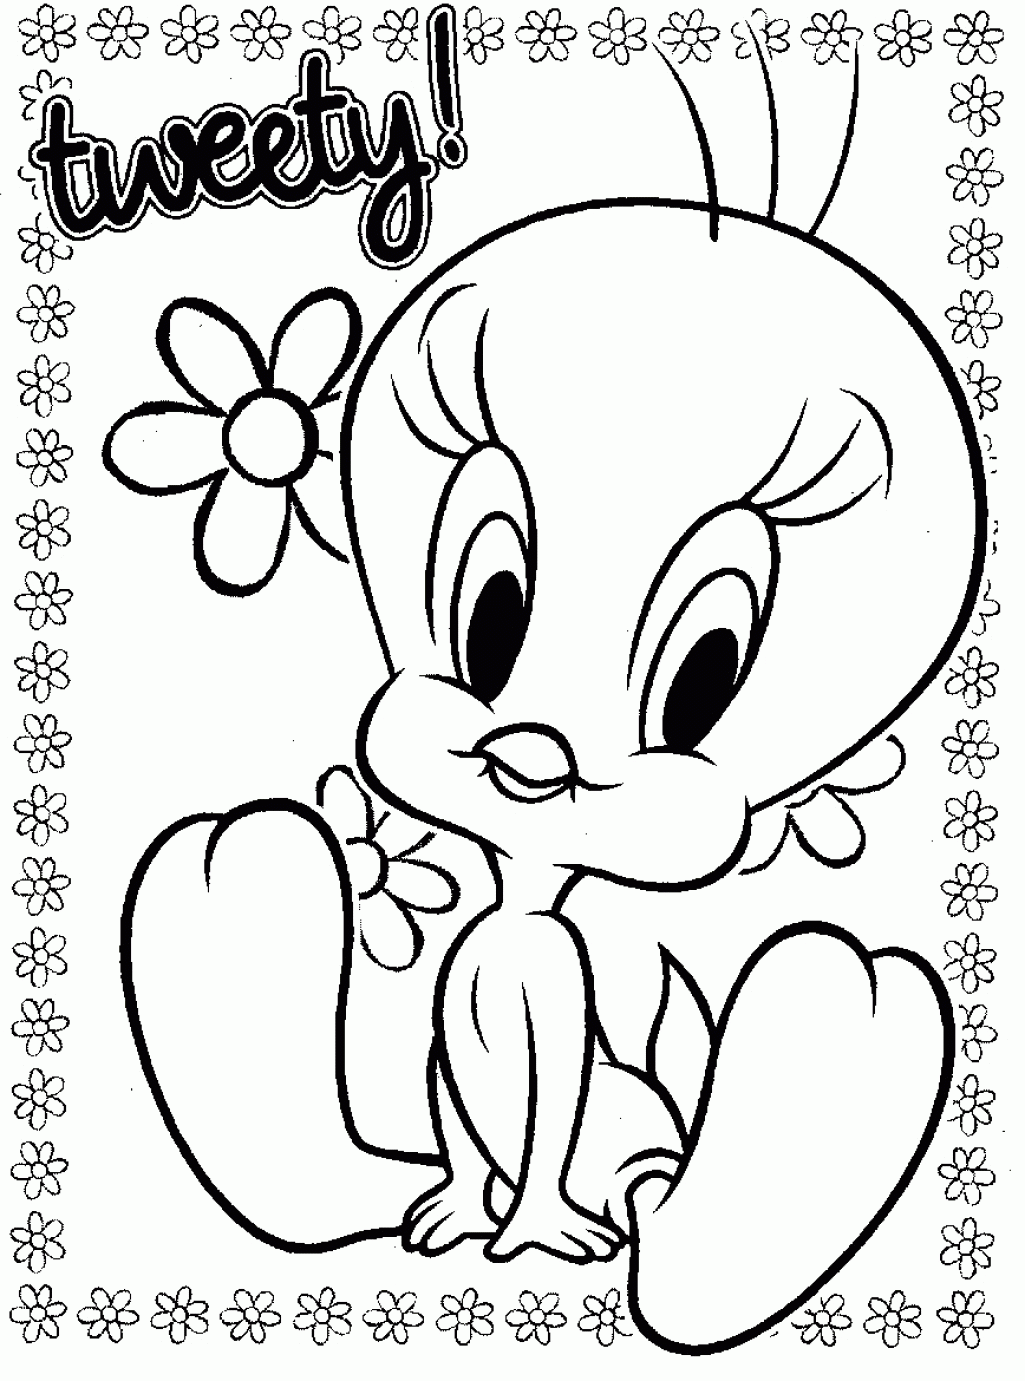 disney cartoon characters coloring pages